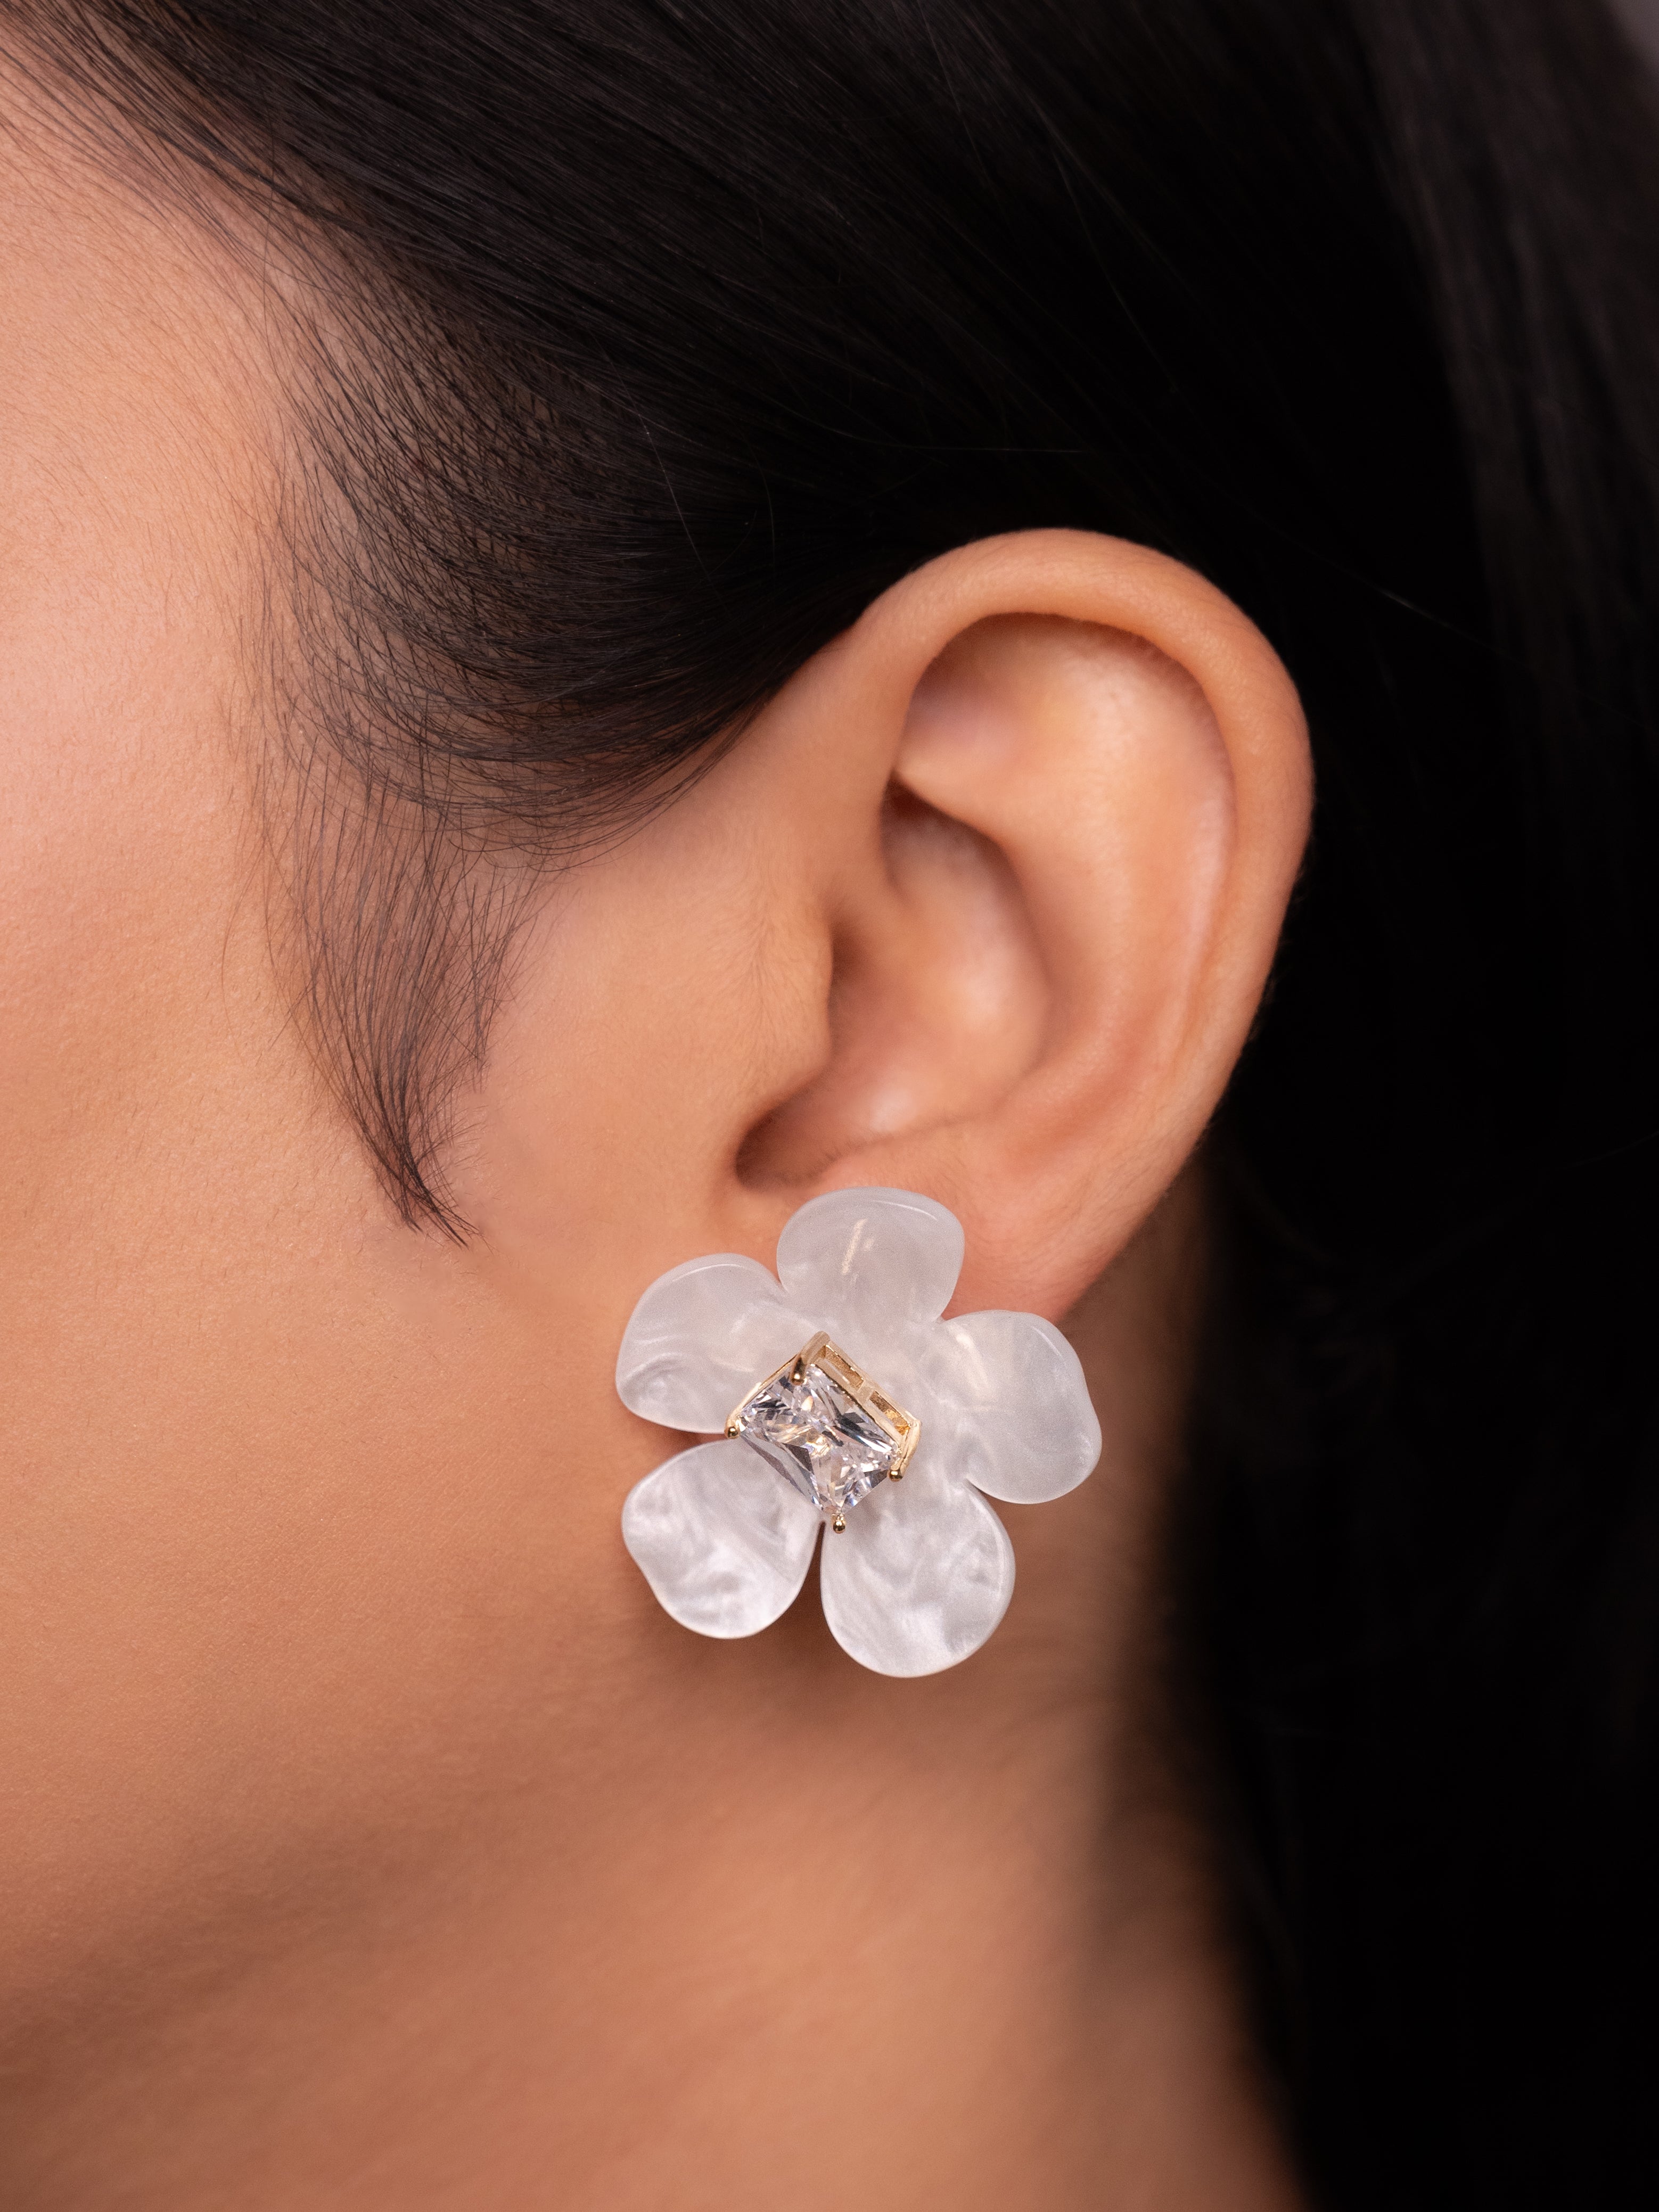 Floral Studs with Push Back Closure Earrings | 18k Gold Plated